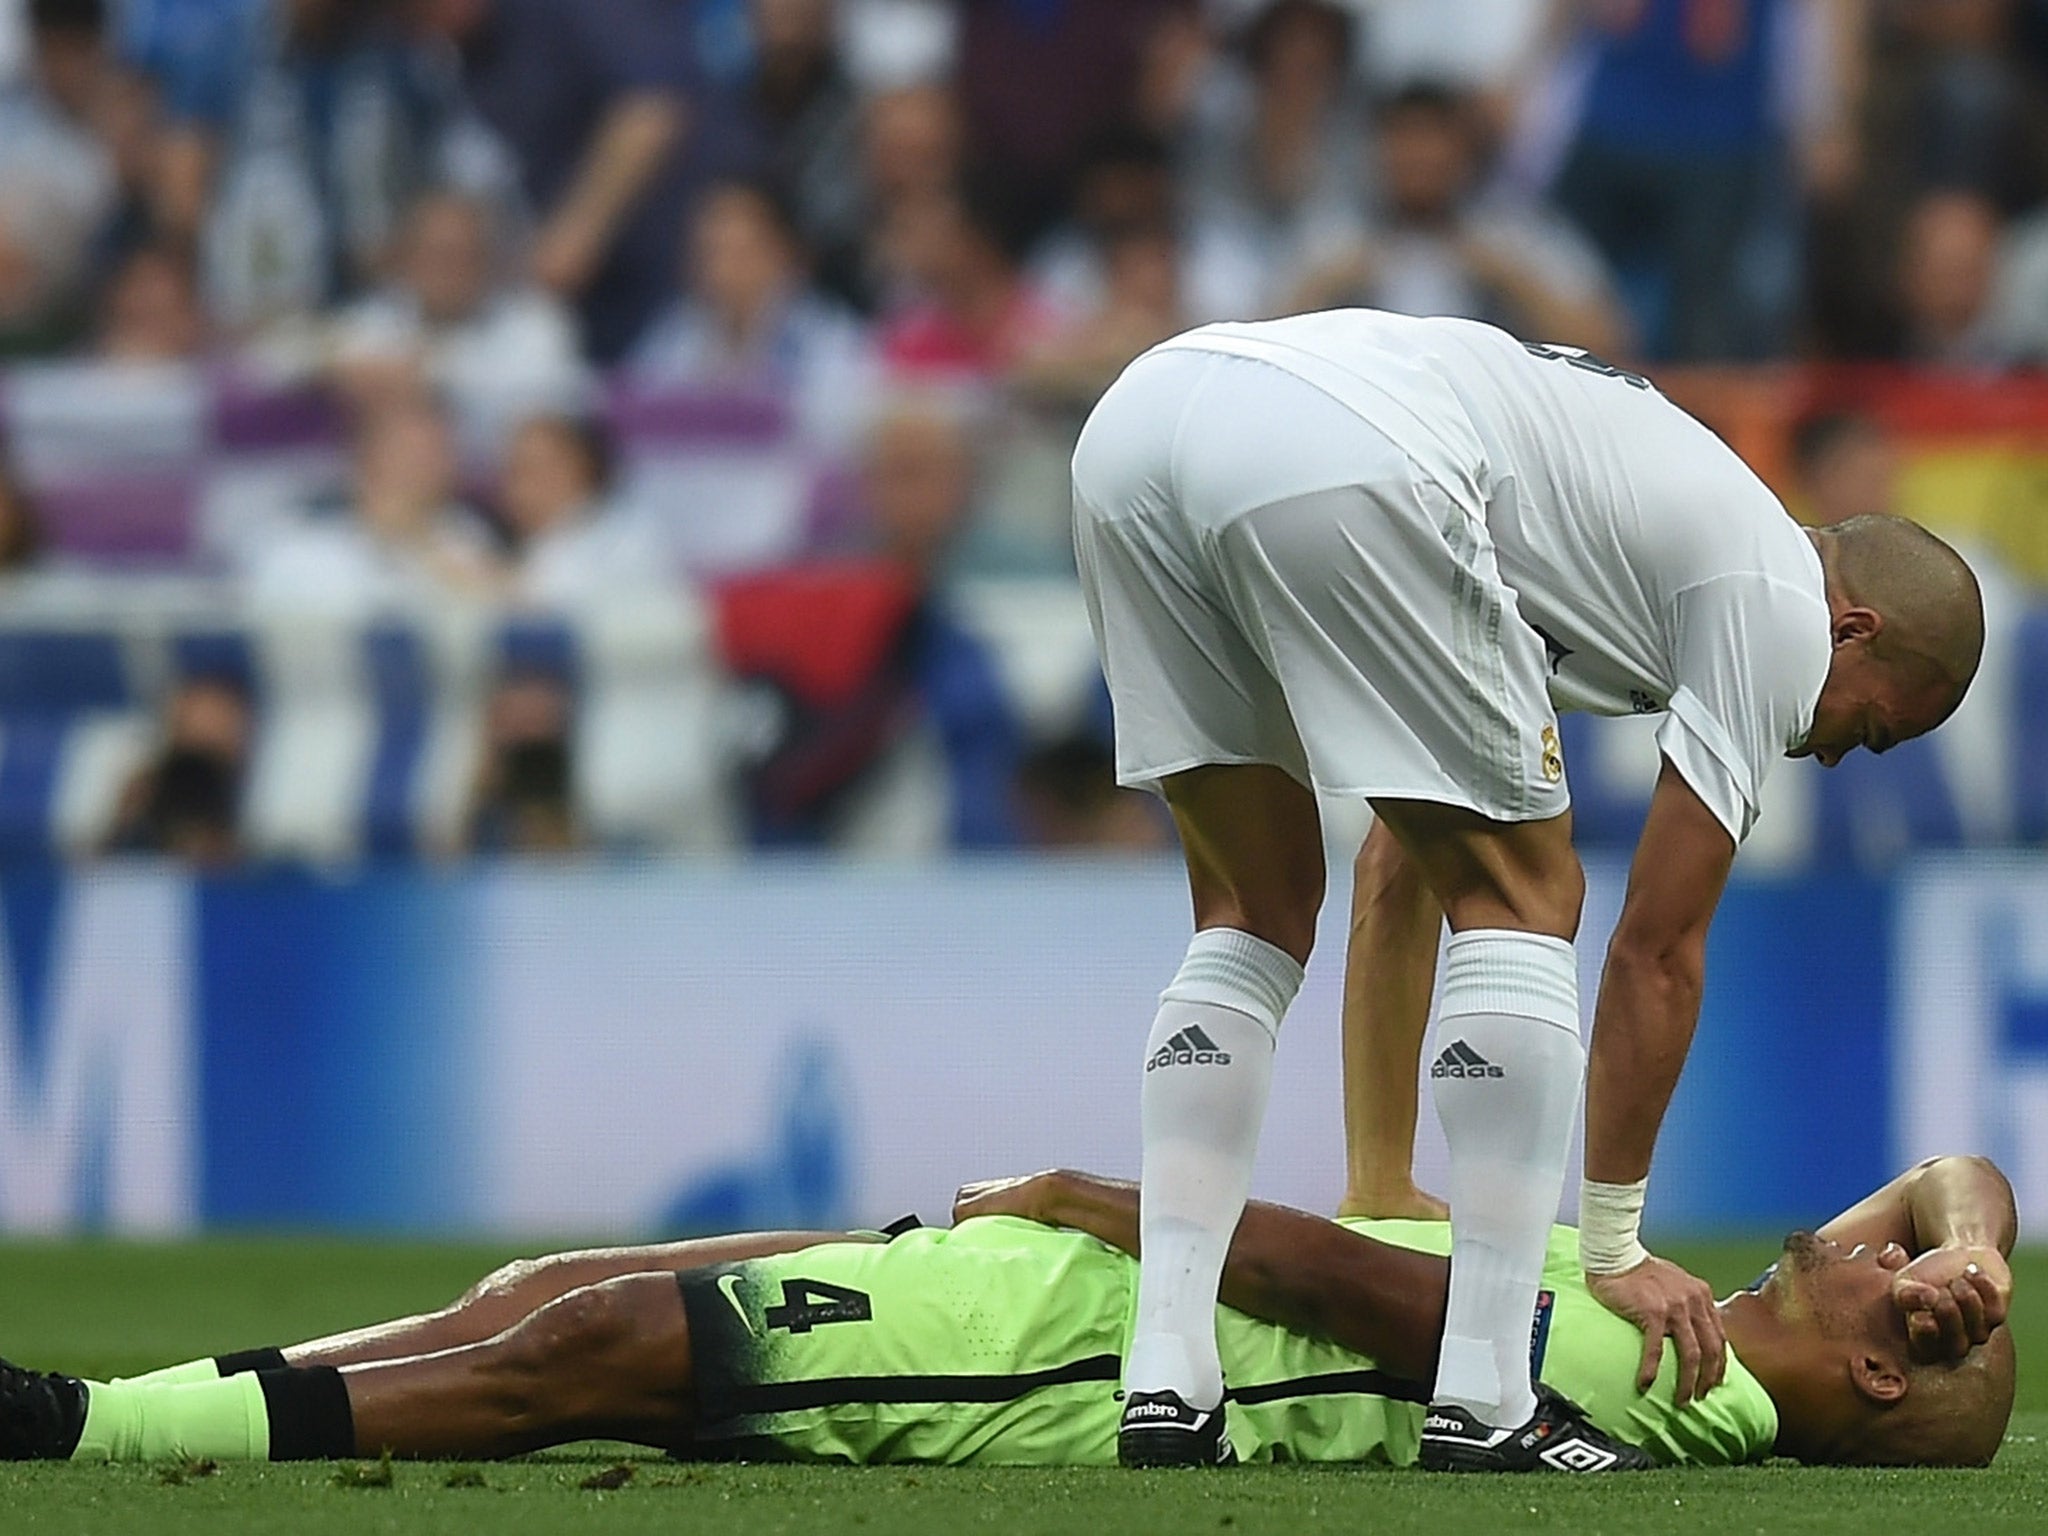 Vincent Kompany flew to Barcelona on Thursday to see a specialist about his latest injury setback